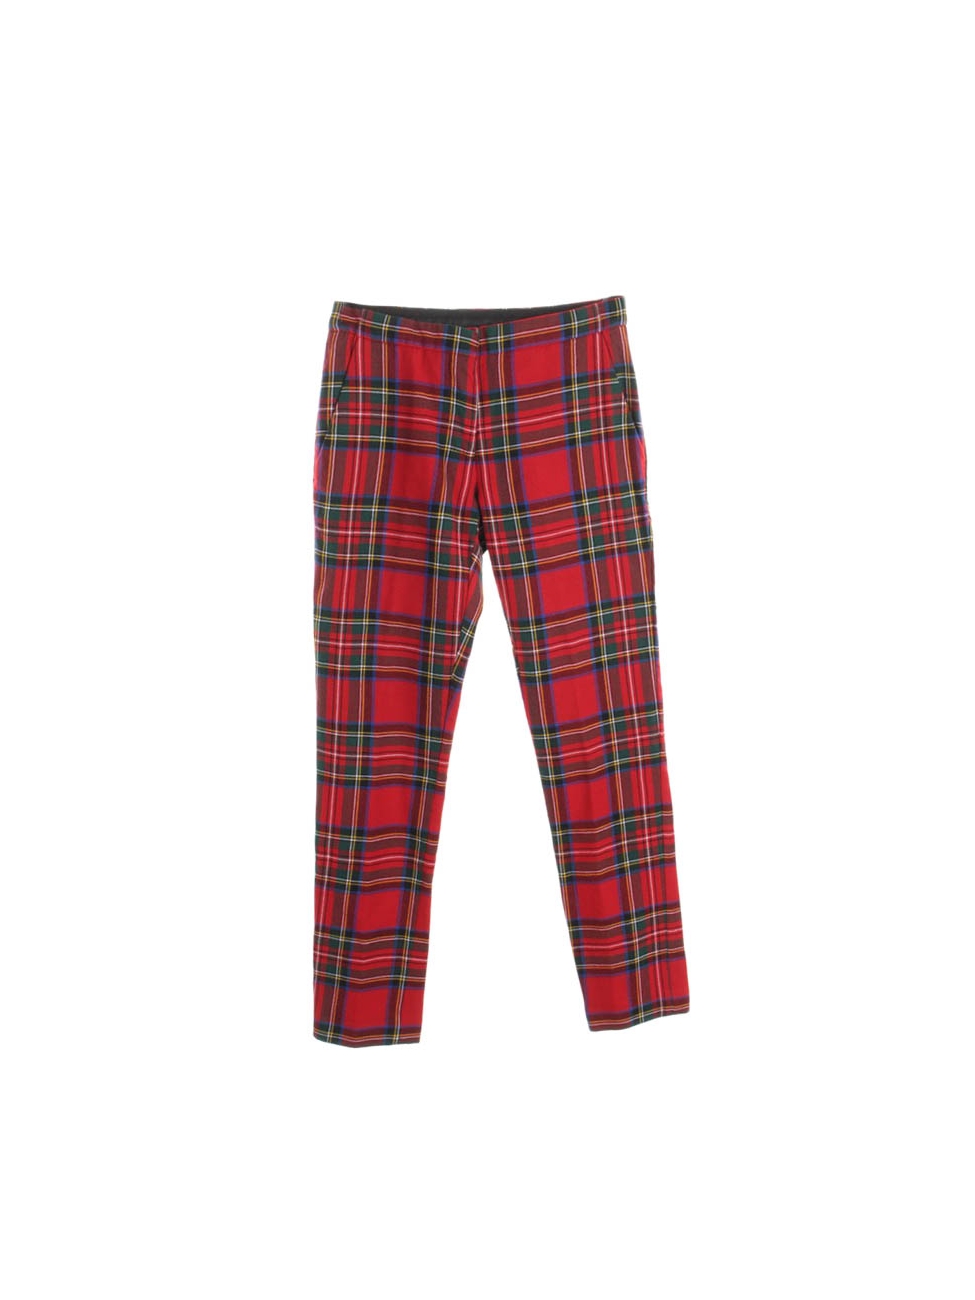 Buy Plus Size Pink Check Printed Lounge Pants Online For Women Amydus